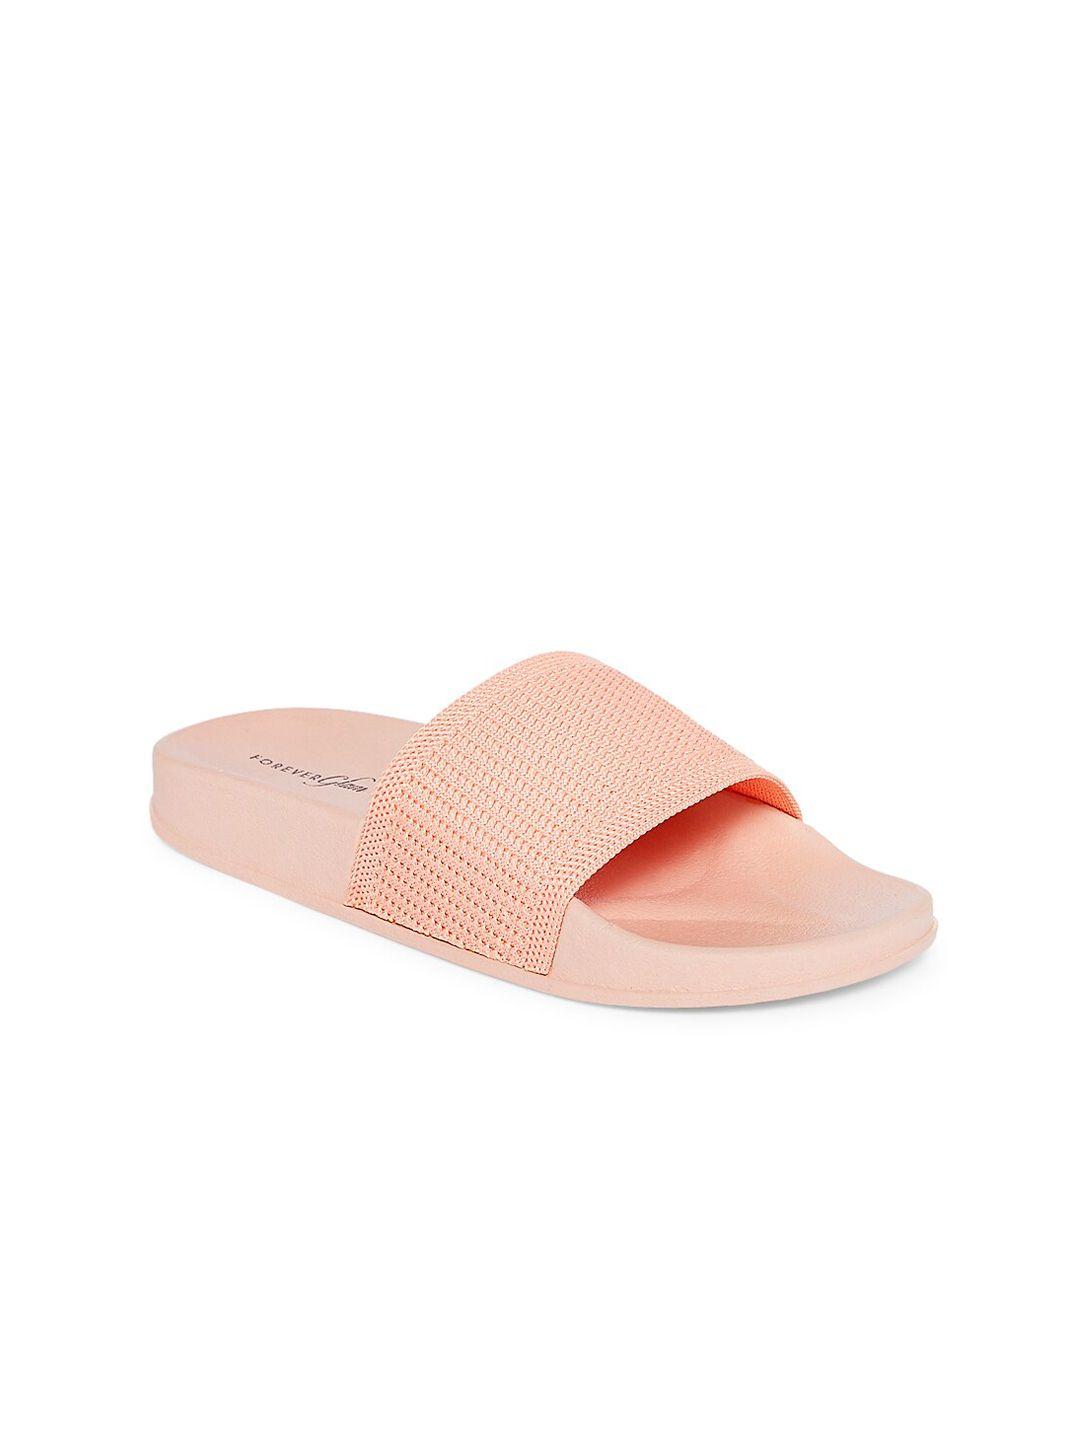 forever glam by pantaloons women coral woven designed sliders